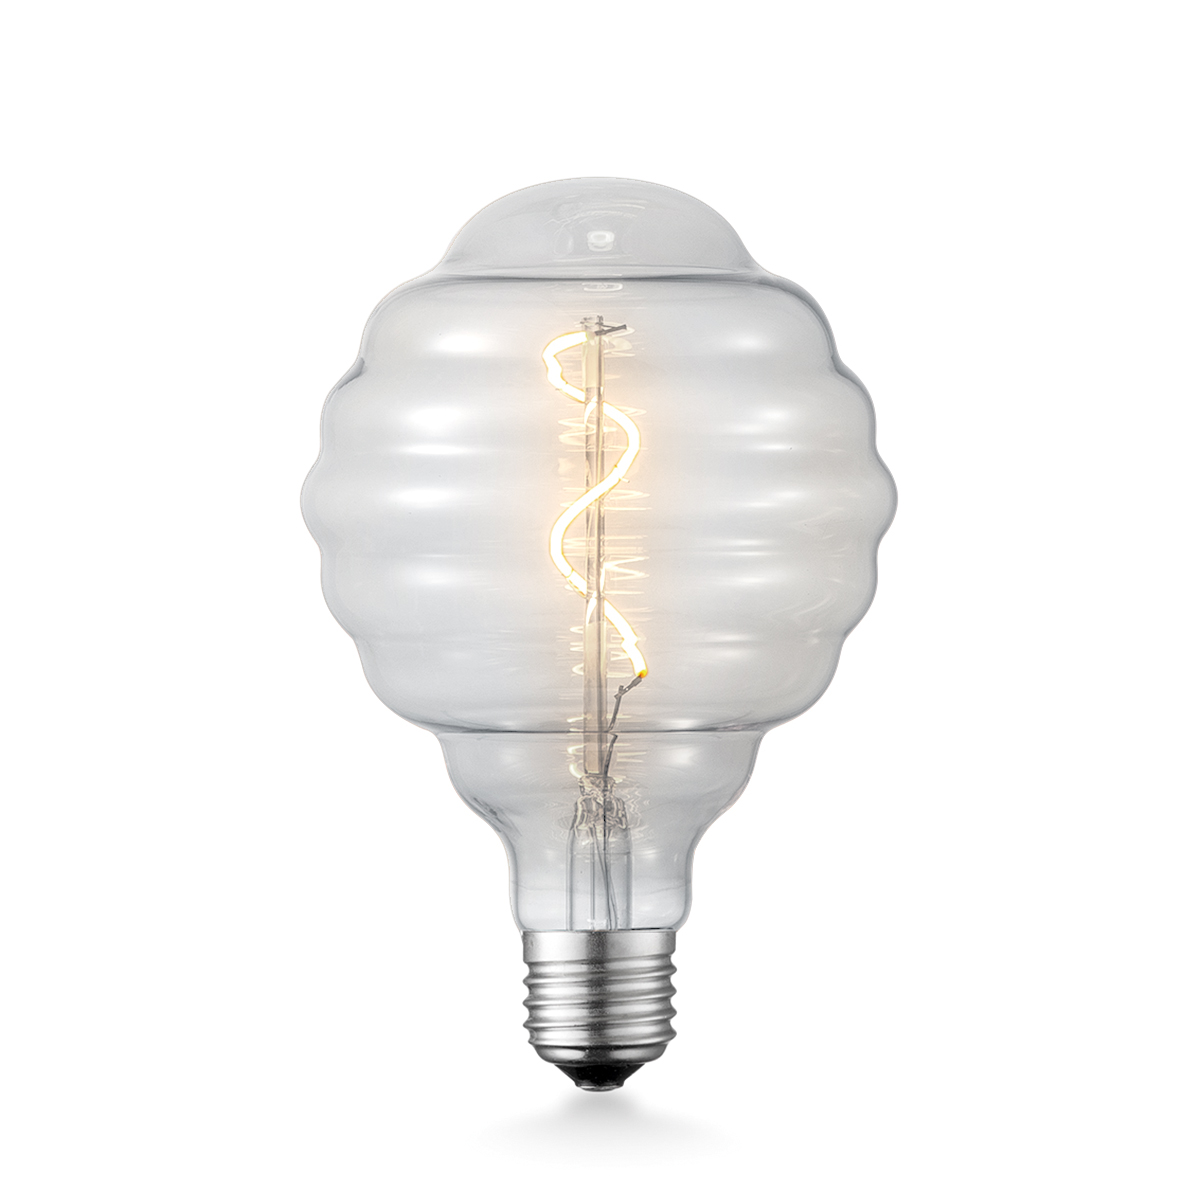 Tangla lighting - TLB-8022-04CL - LED Light Bulb Single Spiral filament - special 4W clear - medium supple - dimmable - E27